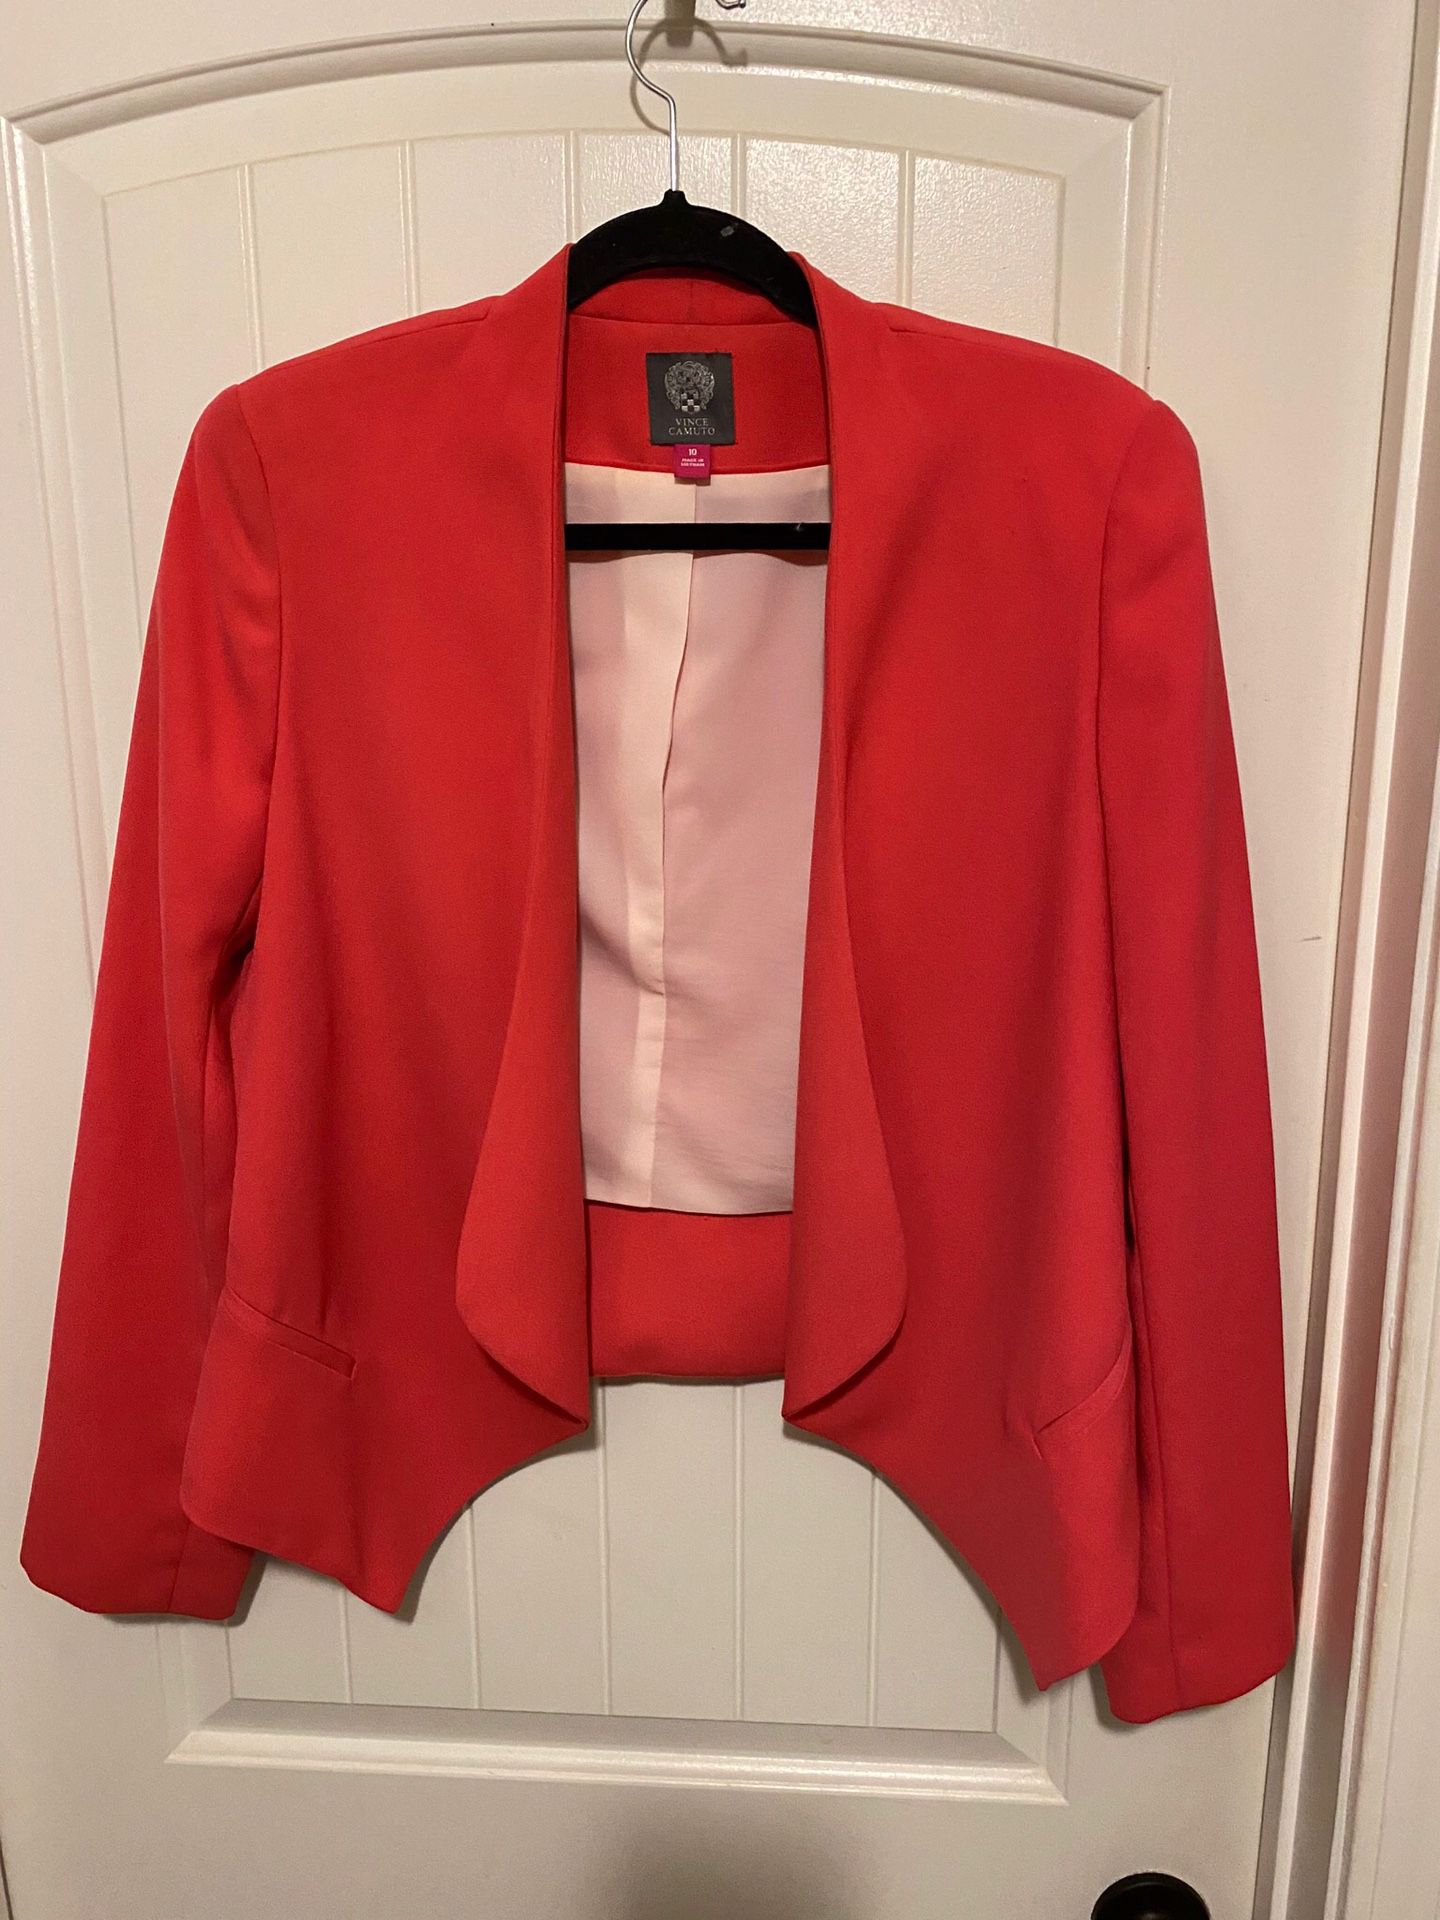 Vince Camuto blazer. Fully lined. Size 10